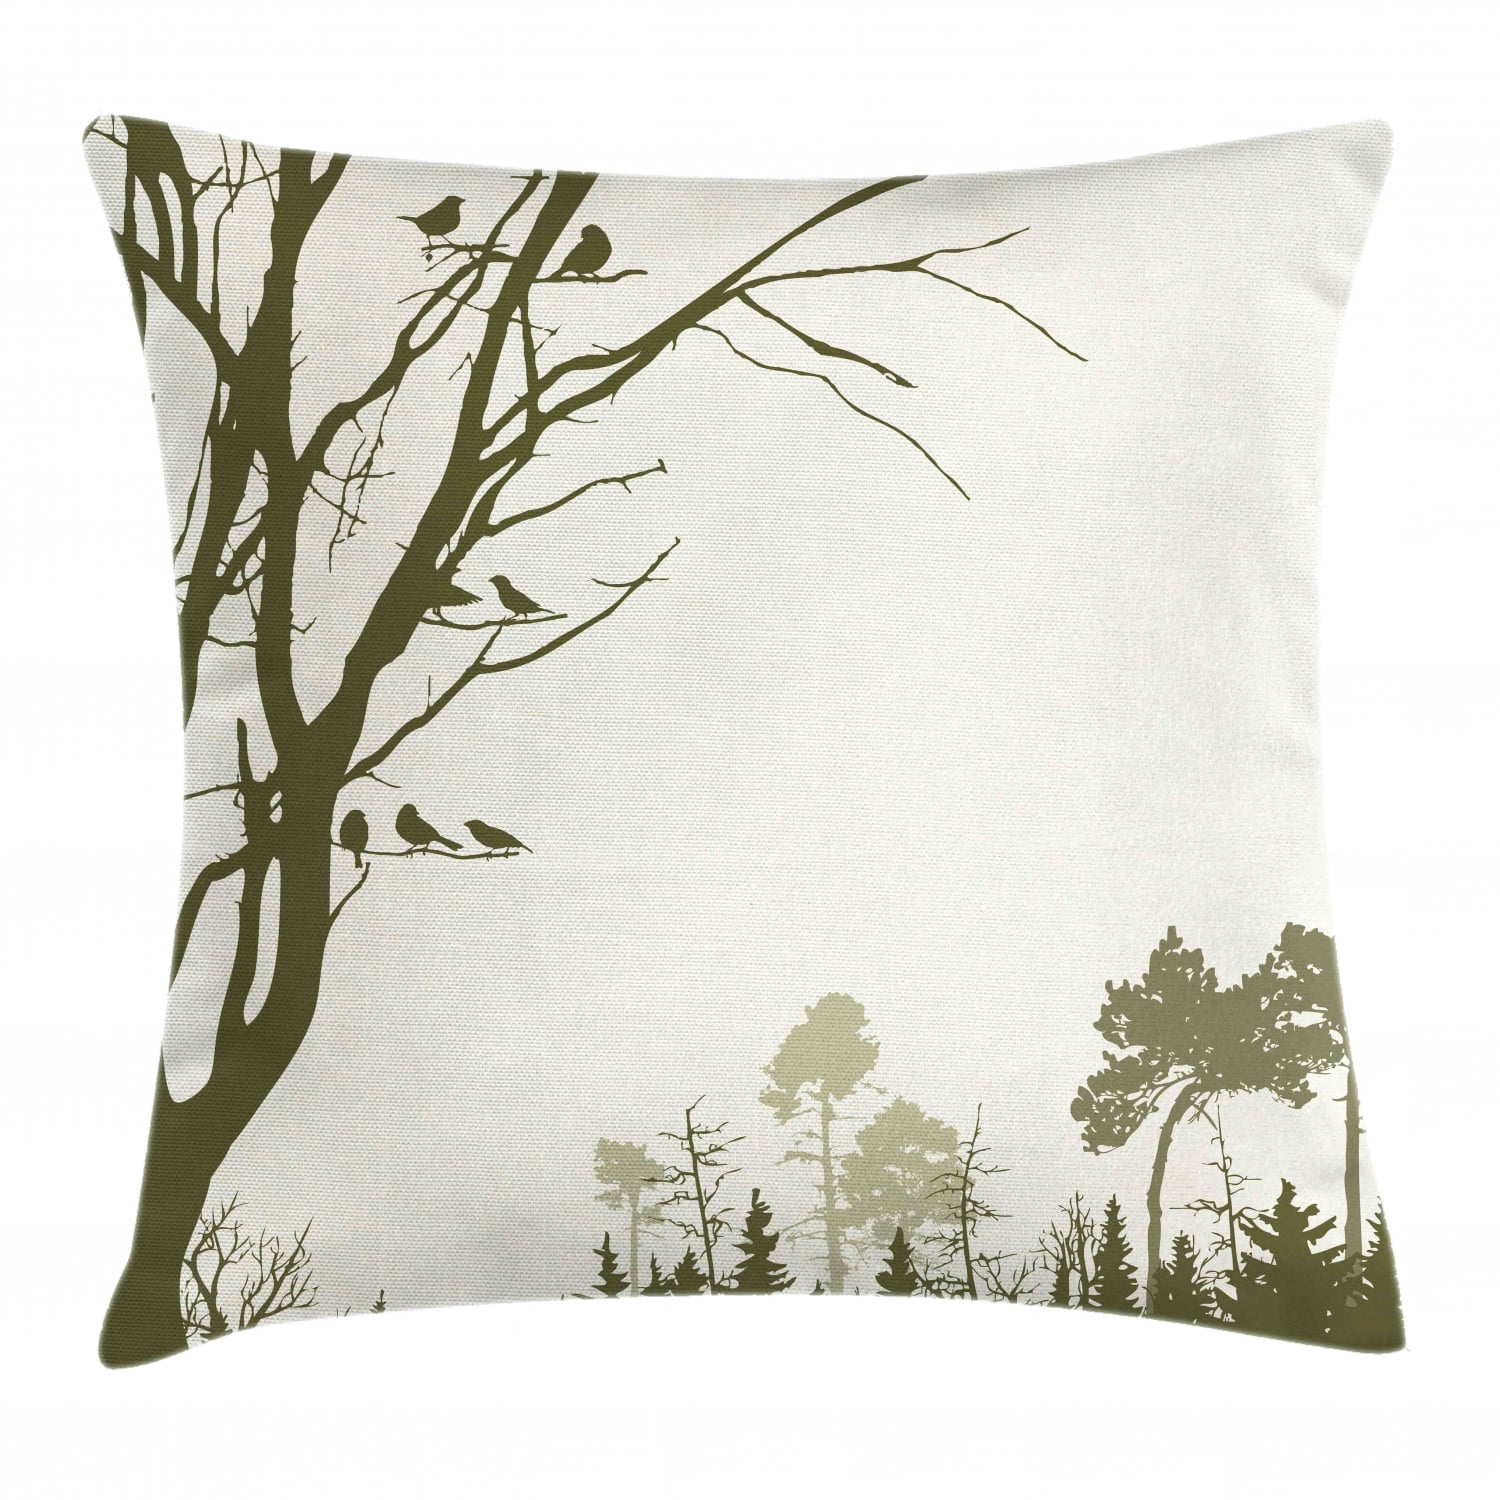 Apartment Decor Throw Pillow Cushion Cover, Nature Theme The Panorama of a Forest  Pattern Birds on Tree Branches, Decorative Square Accent Pillow Case, 16 X  16 Inches, Cream Sage Green, by Ambesonne 